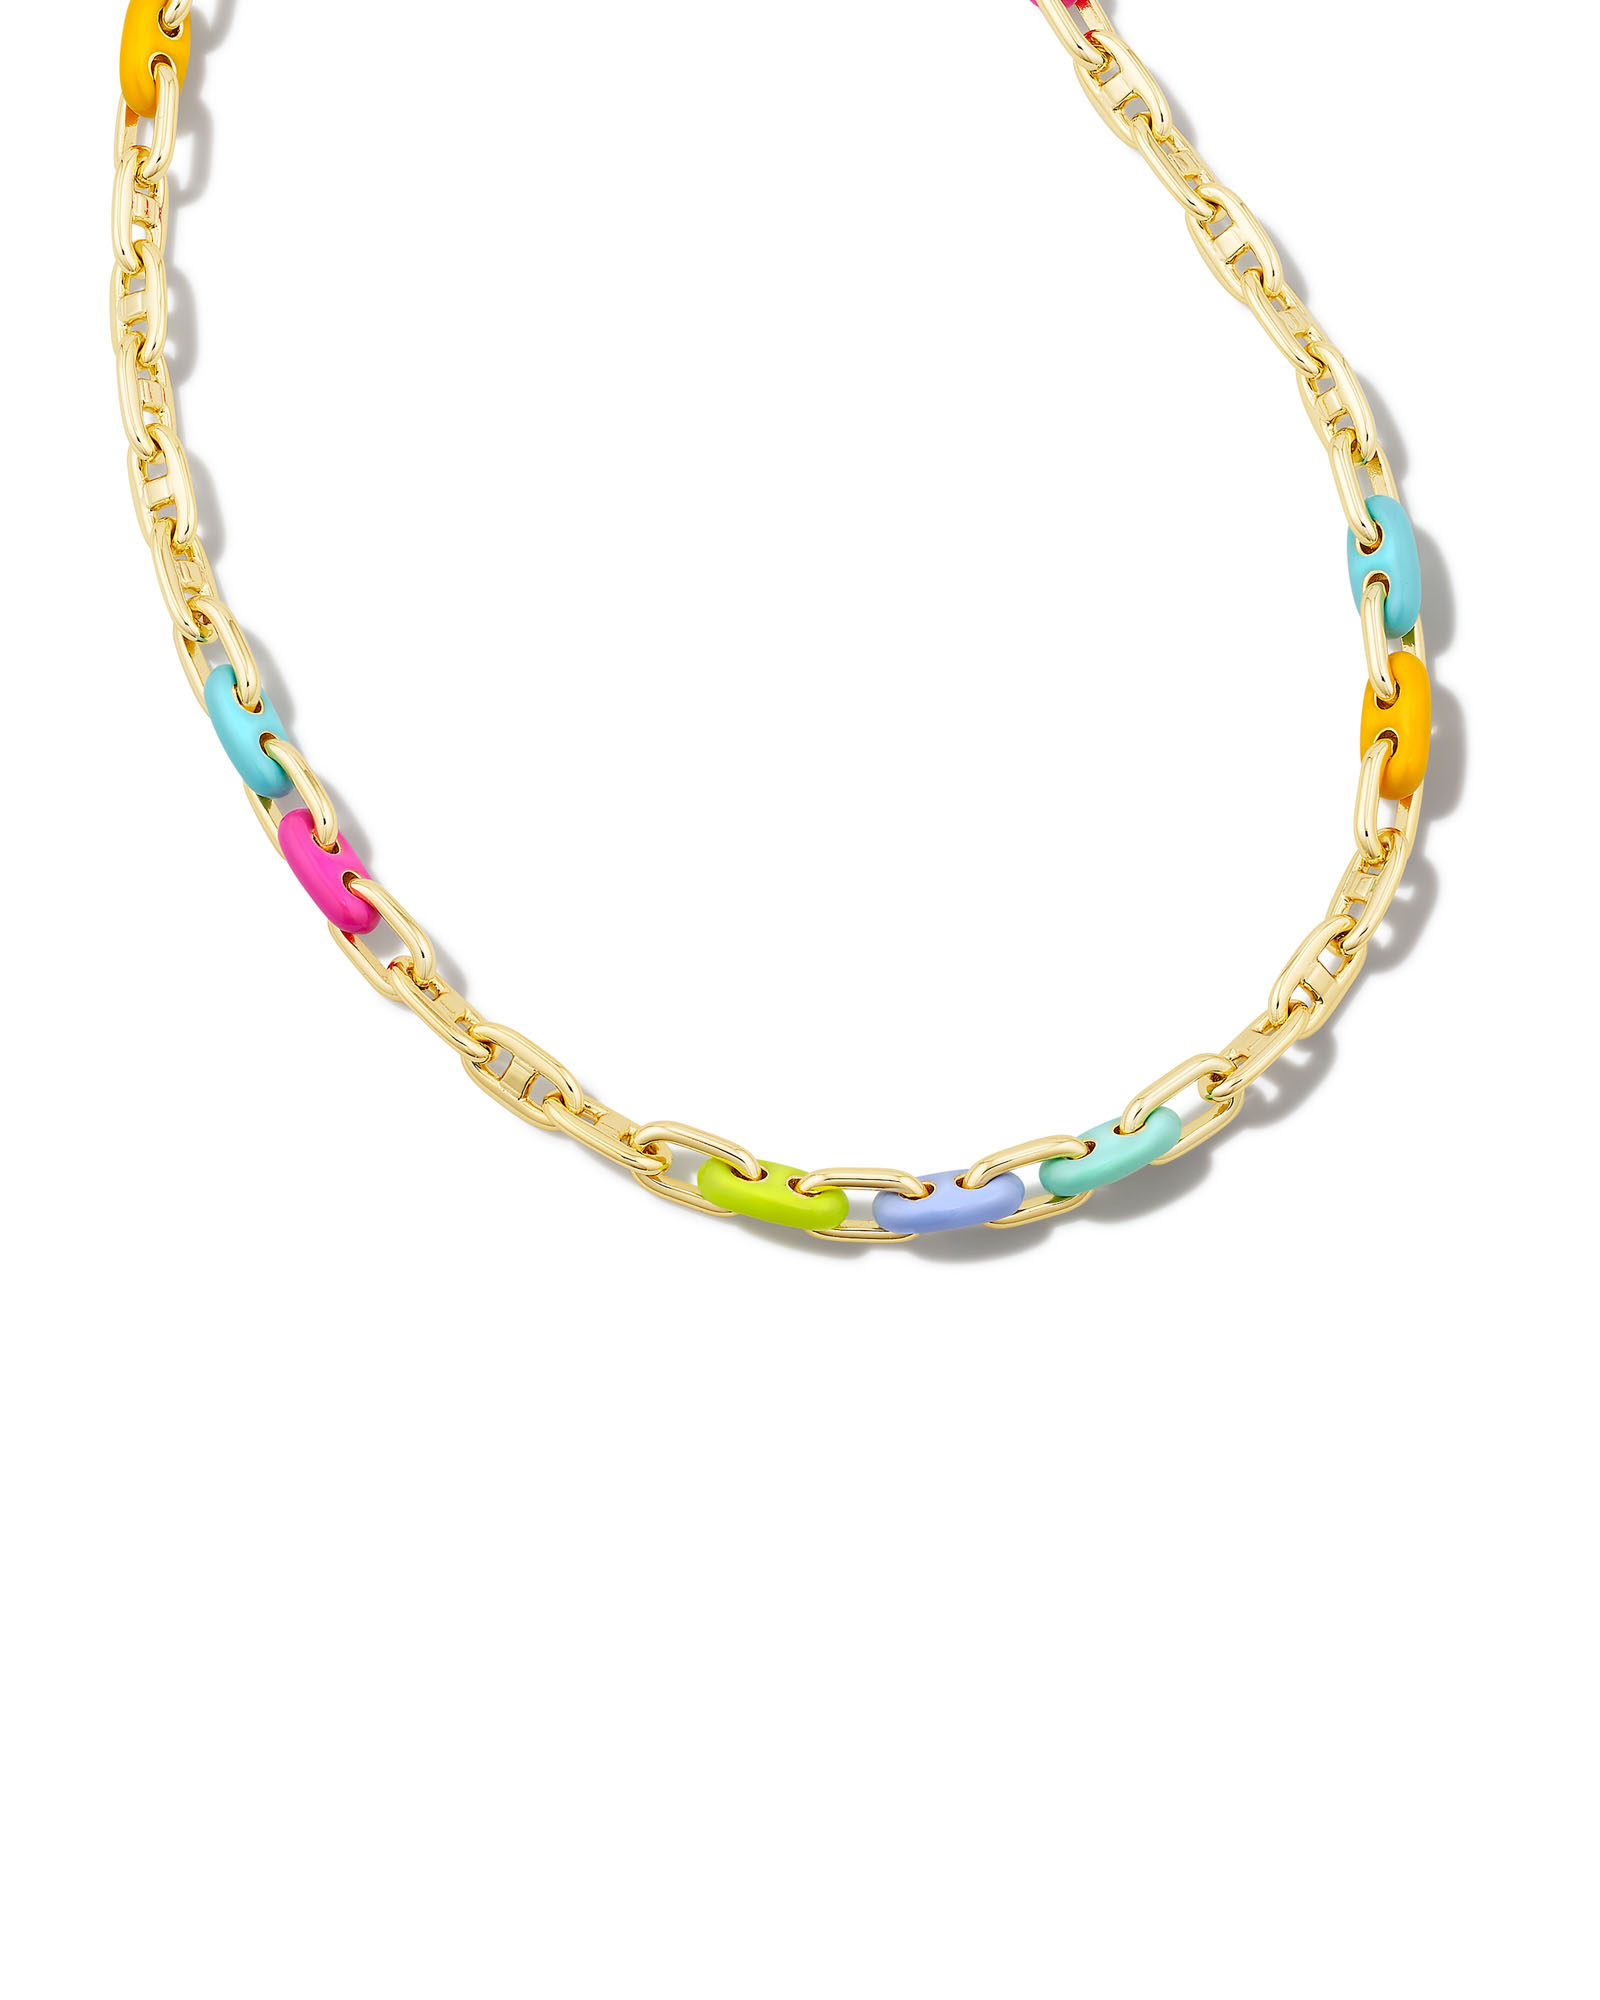 Kendra Scott Colorful Chain Necklace